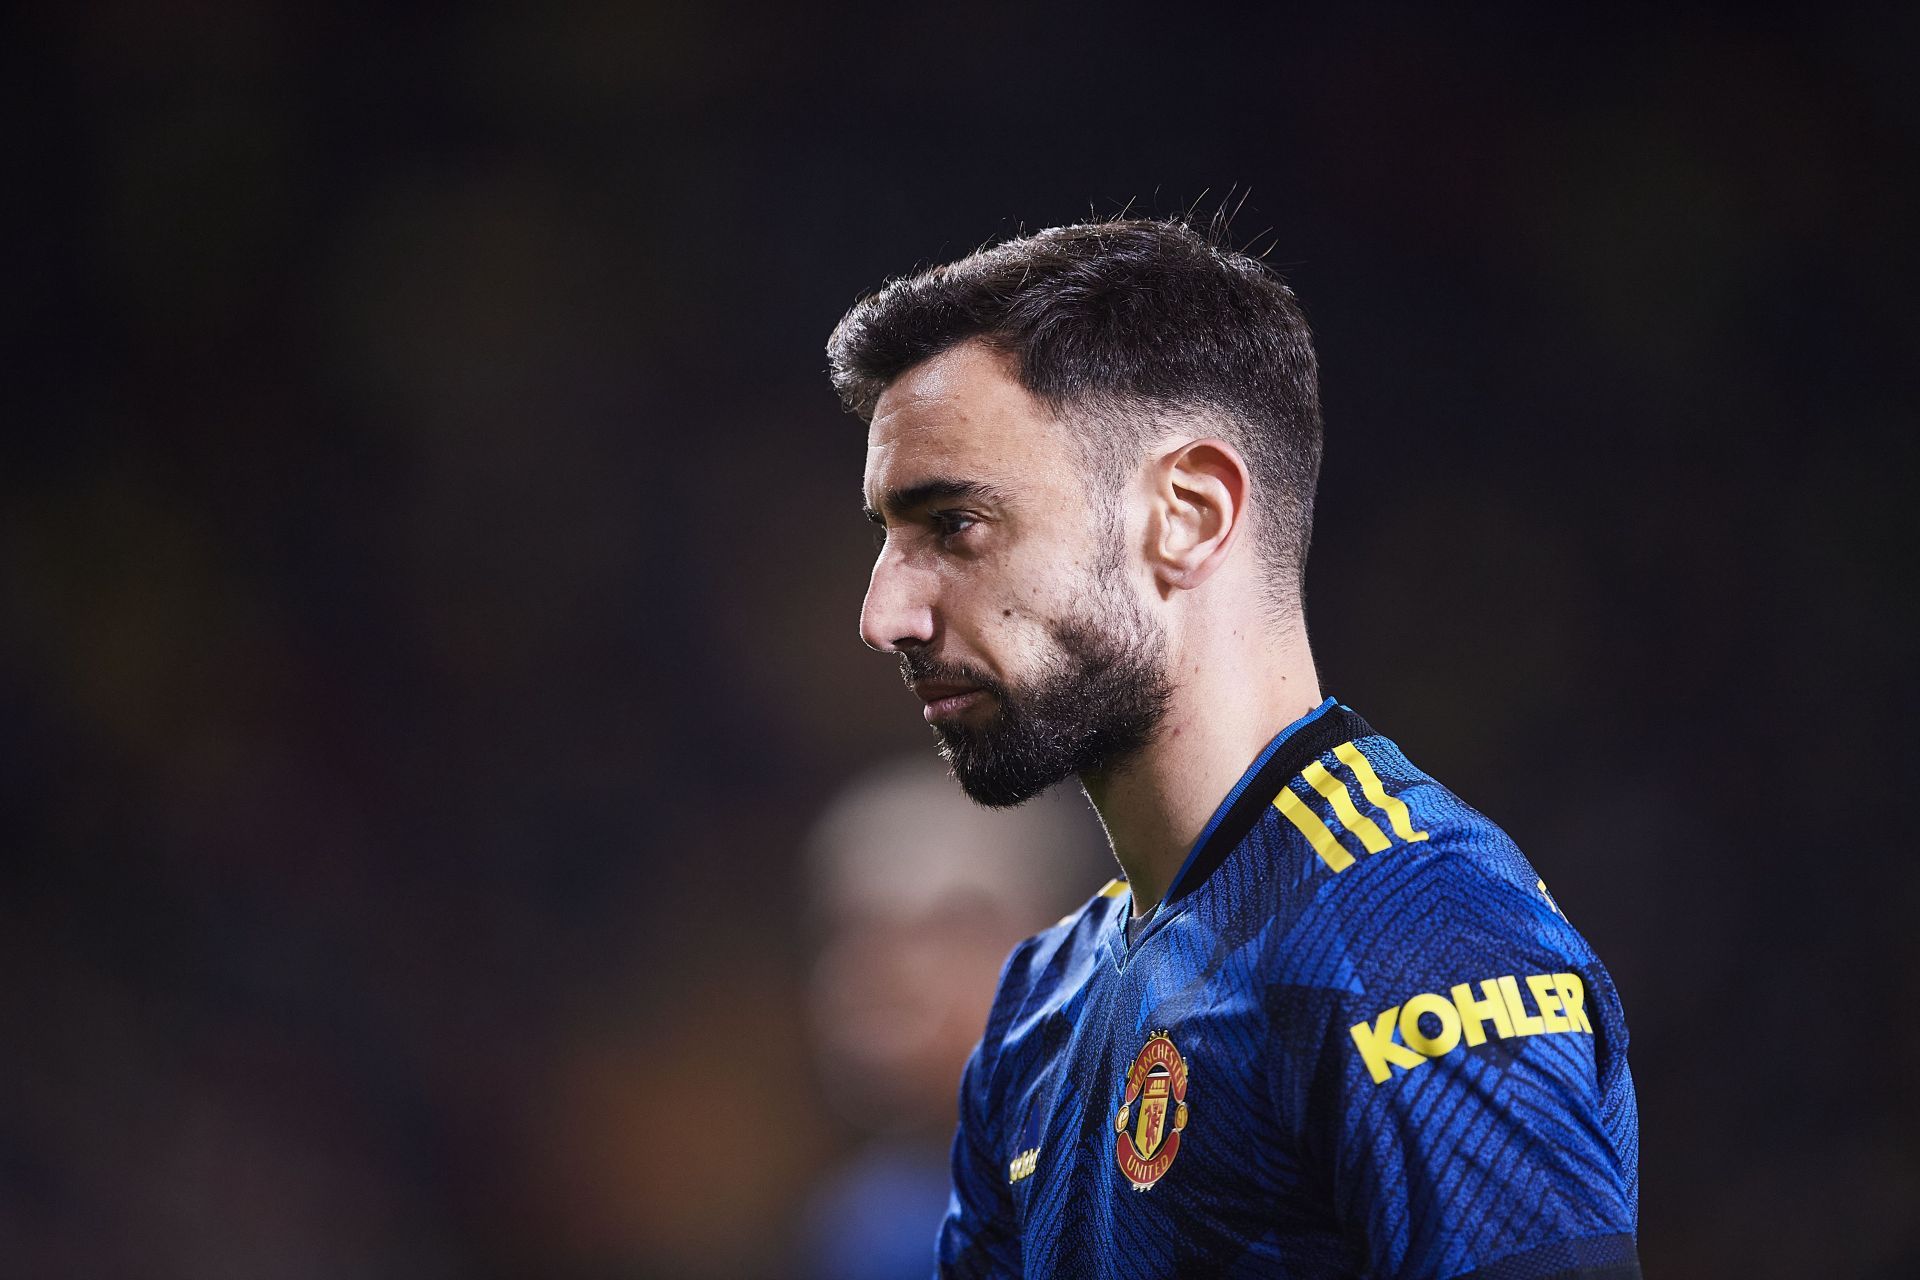 Bruno Fernandes has been an inspired signing by Manchester United.